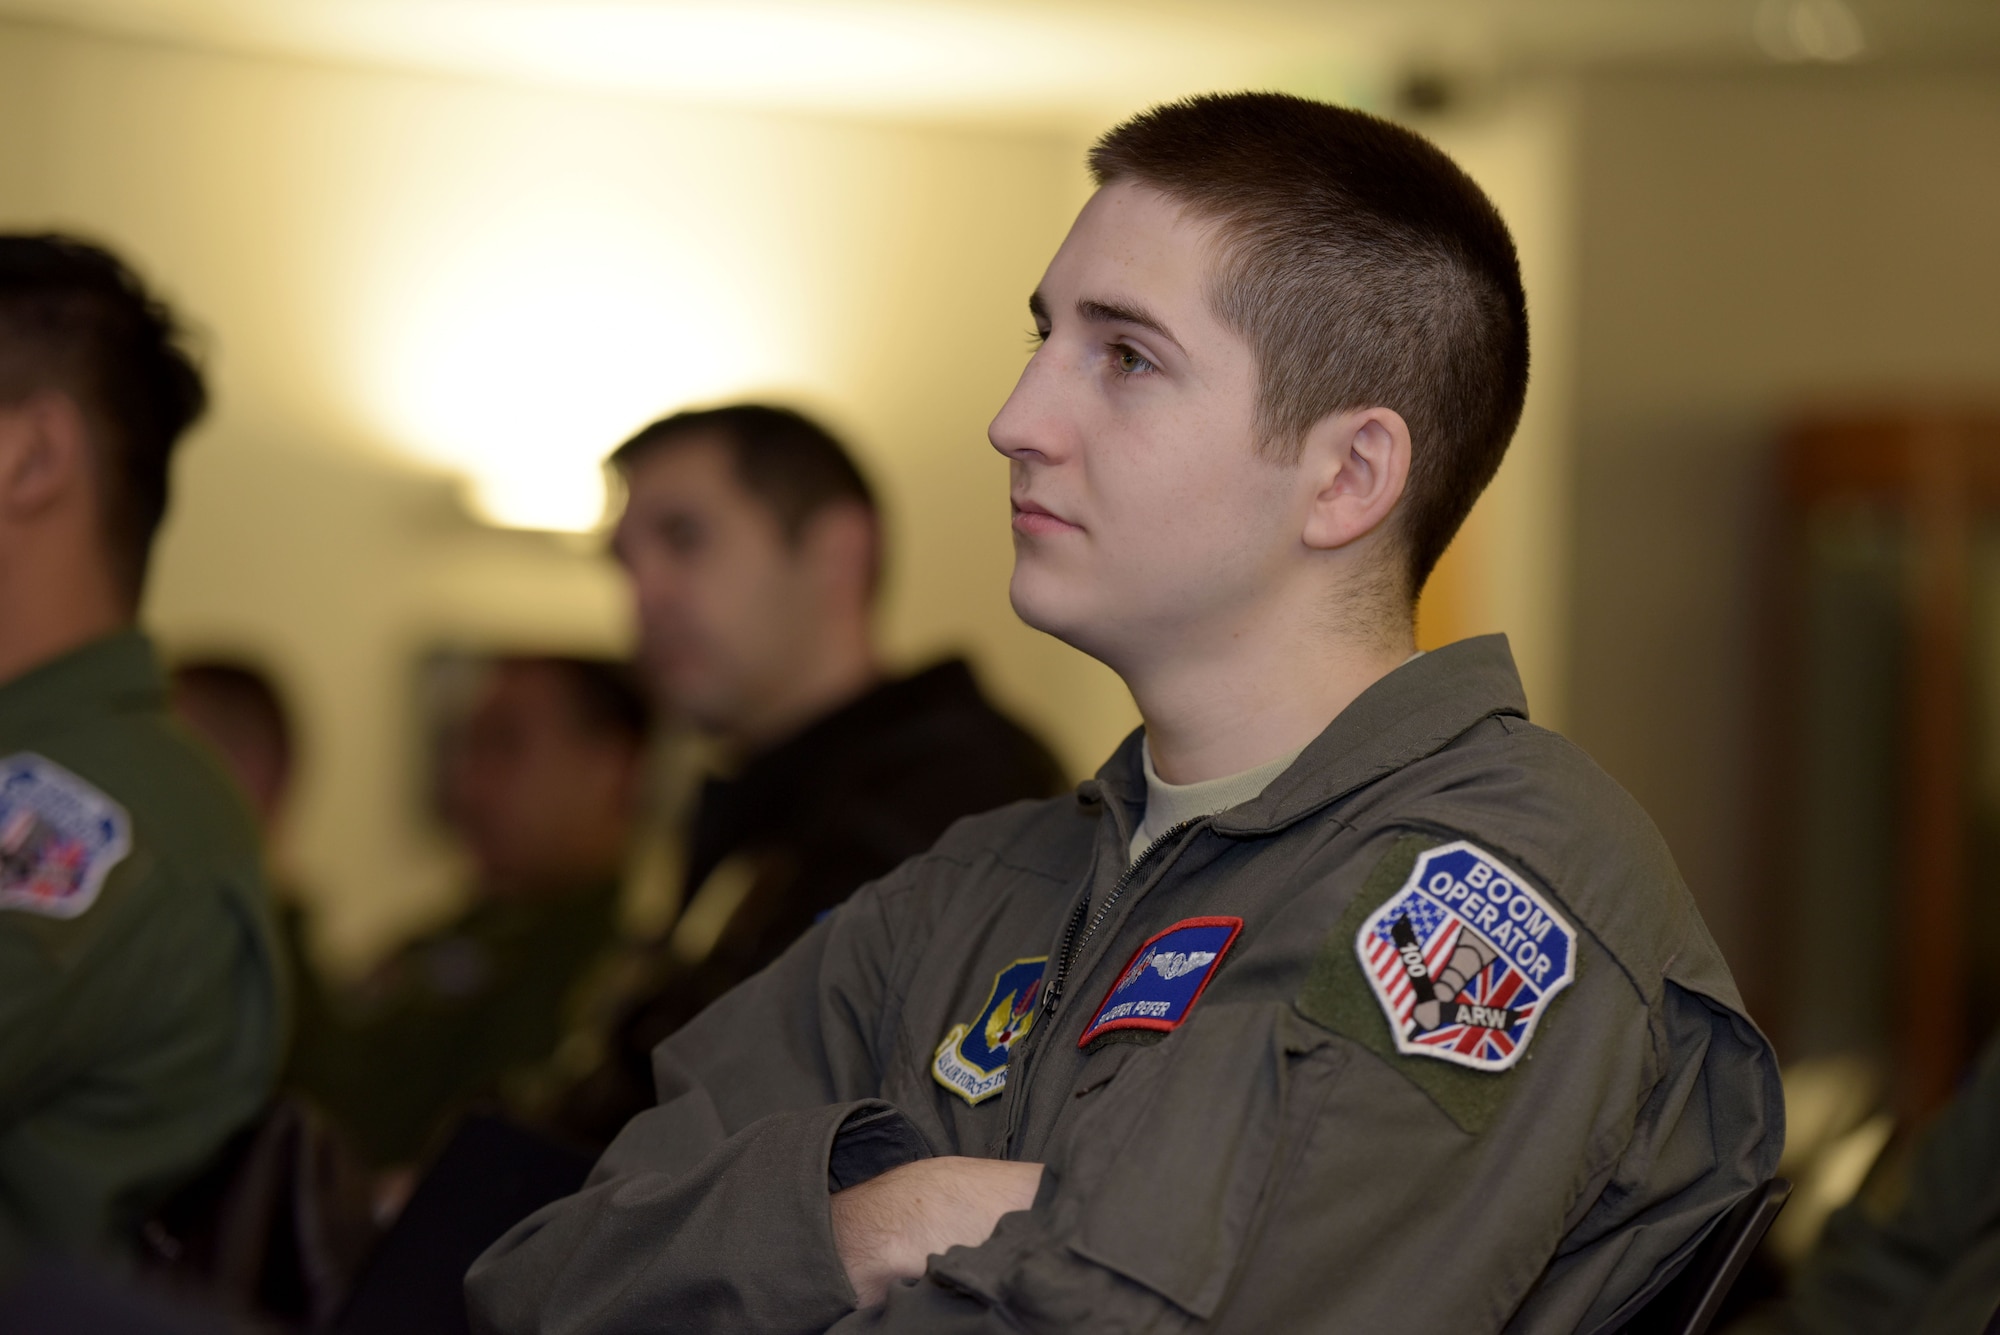 U.S. Air Force Senior Airman Derek Peifer, 351st Air Refueling Squadron boom operator, listens to senior enlisted leaders from the career enlisted aviator career field at RAF Mildenhall, Feb. 8, 2018. The briefings discussed CEA retention issues, incentive programs and cross-training opportunities for Airmen interested in the CEA career fields. (U.S. Air Force photo by Senior Airman Alexandra West)